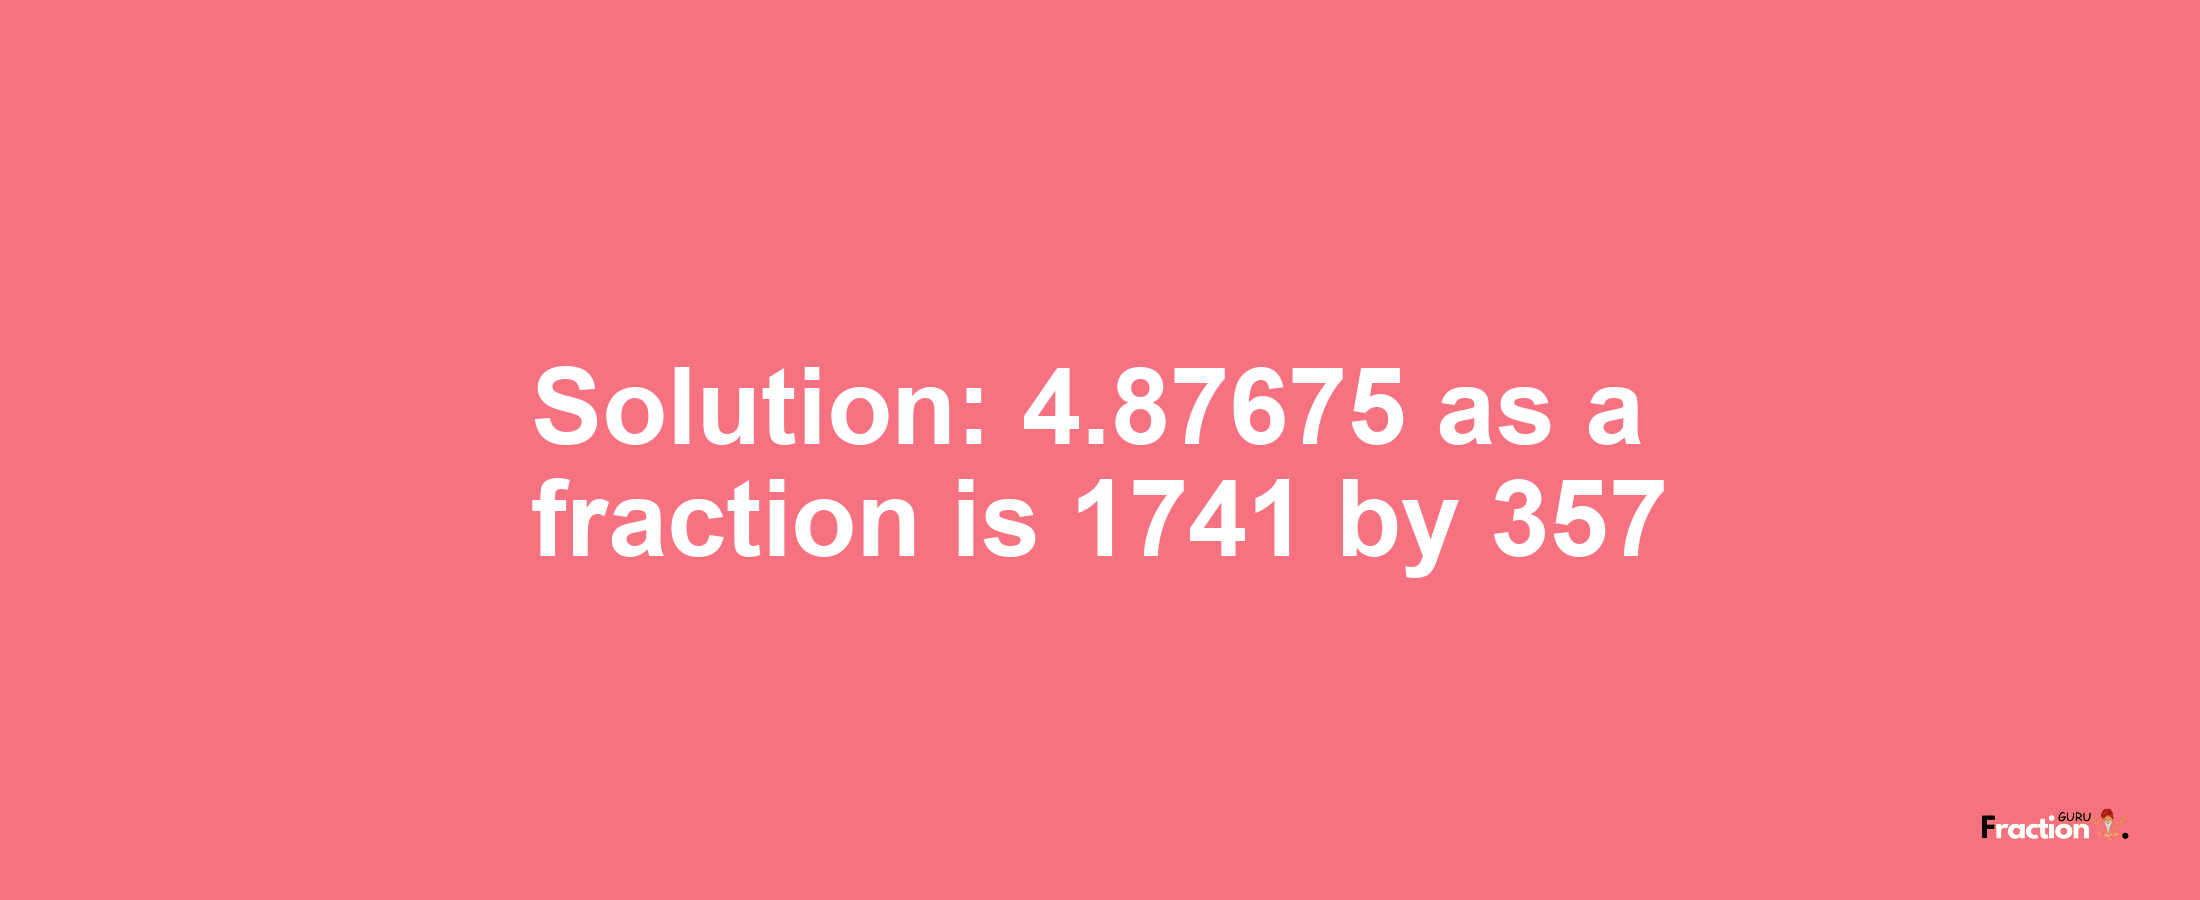 Solution:4.87675 as a fraction is 1741/357